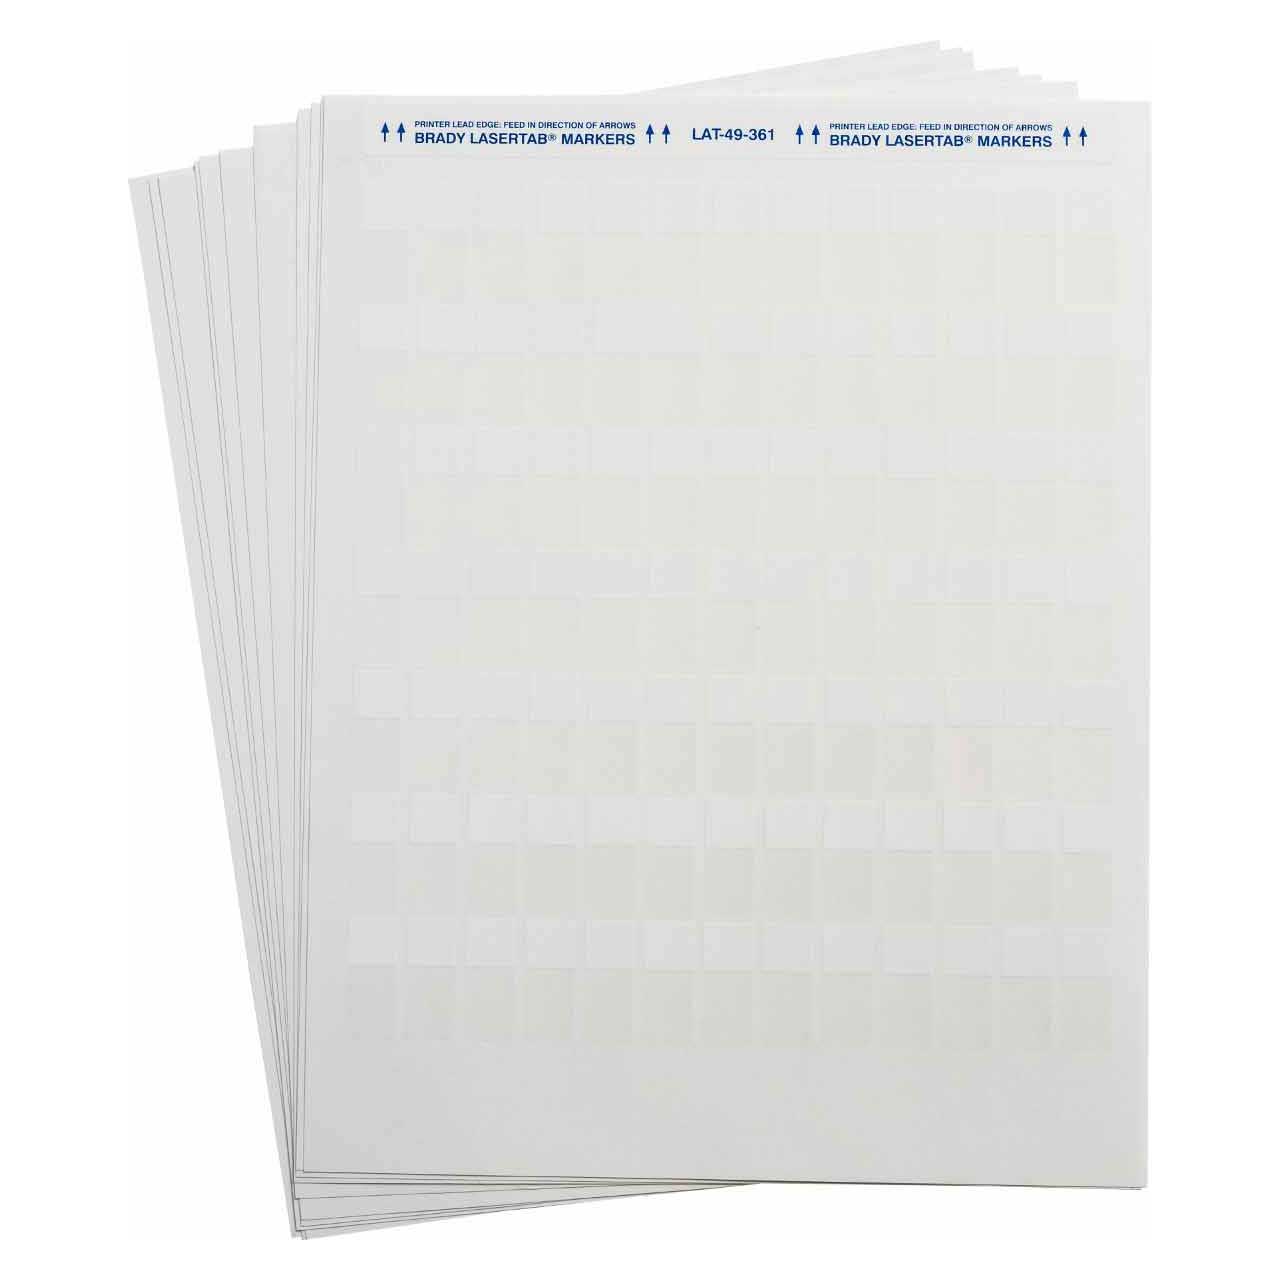 Brady LAT-49-361-1 LaserTab Series Self-Laminating Polyester Labels - 1.25 x 0.5 Inches - White - Pack of 11 Sheets LAT-49-361-1